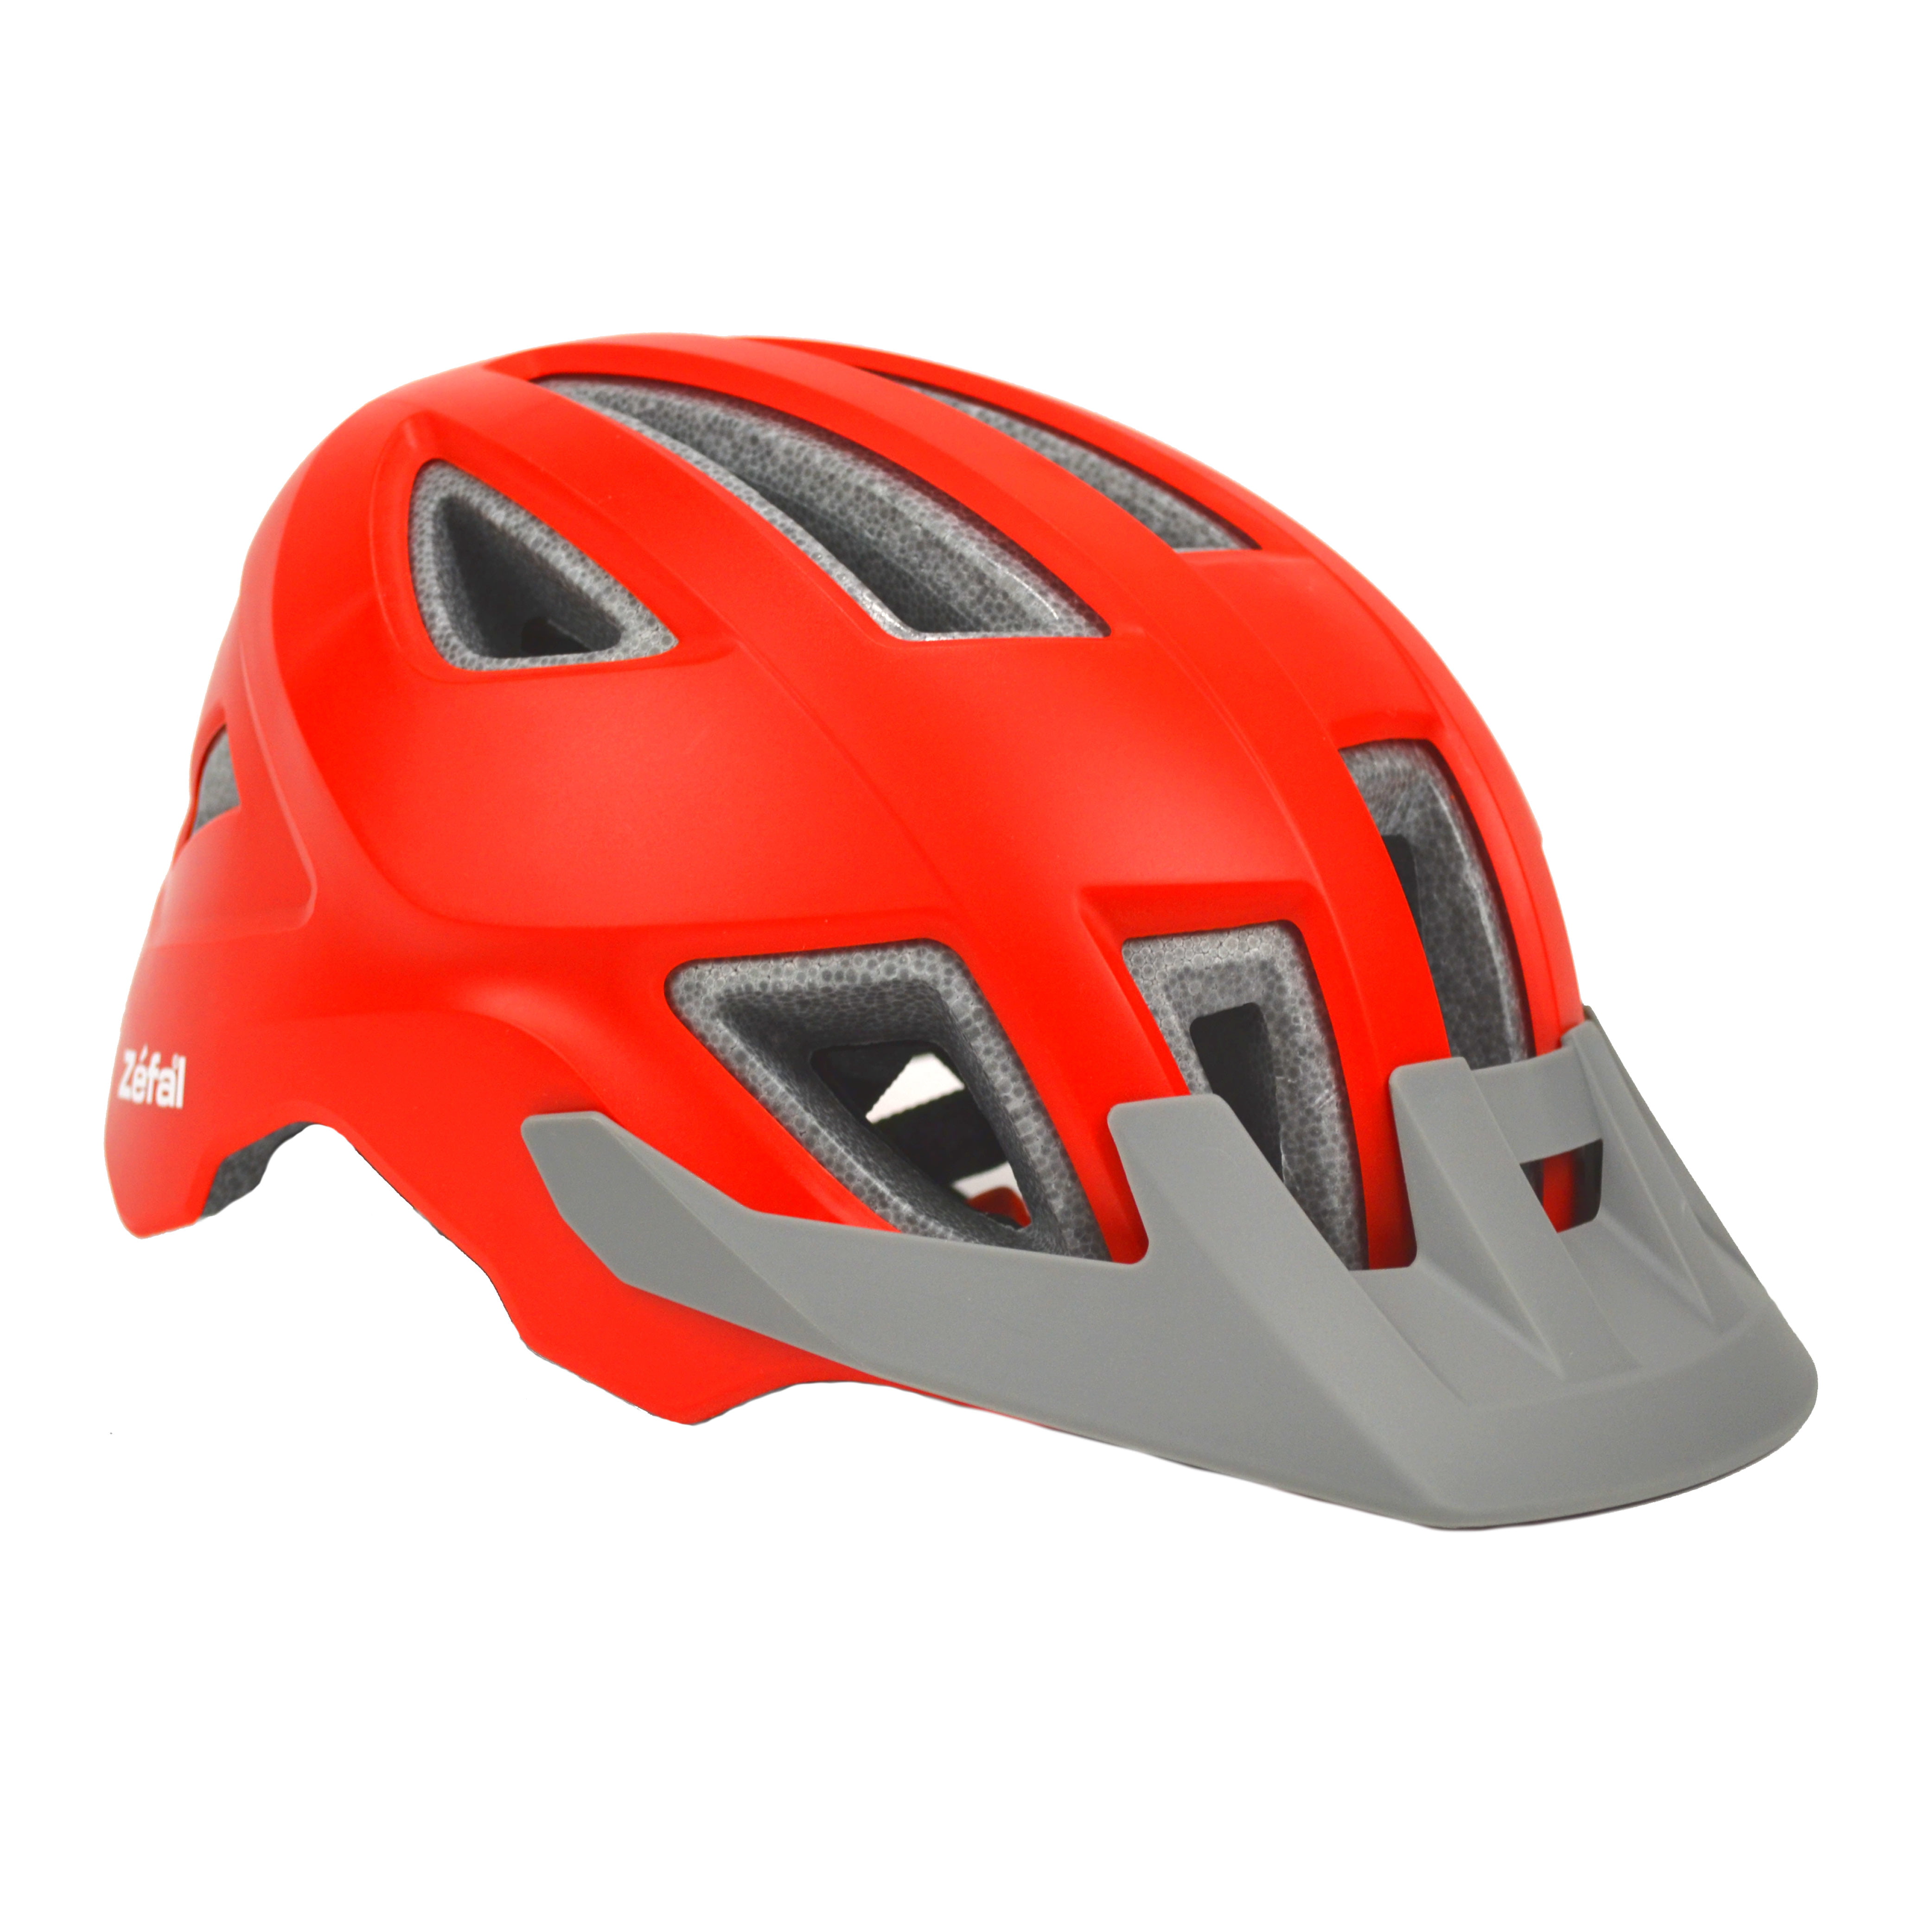 RED Kids Bicycle Helmet S/M/L Cycling Skateboard Scooter Protective Gear NEW 